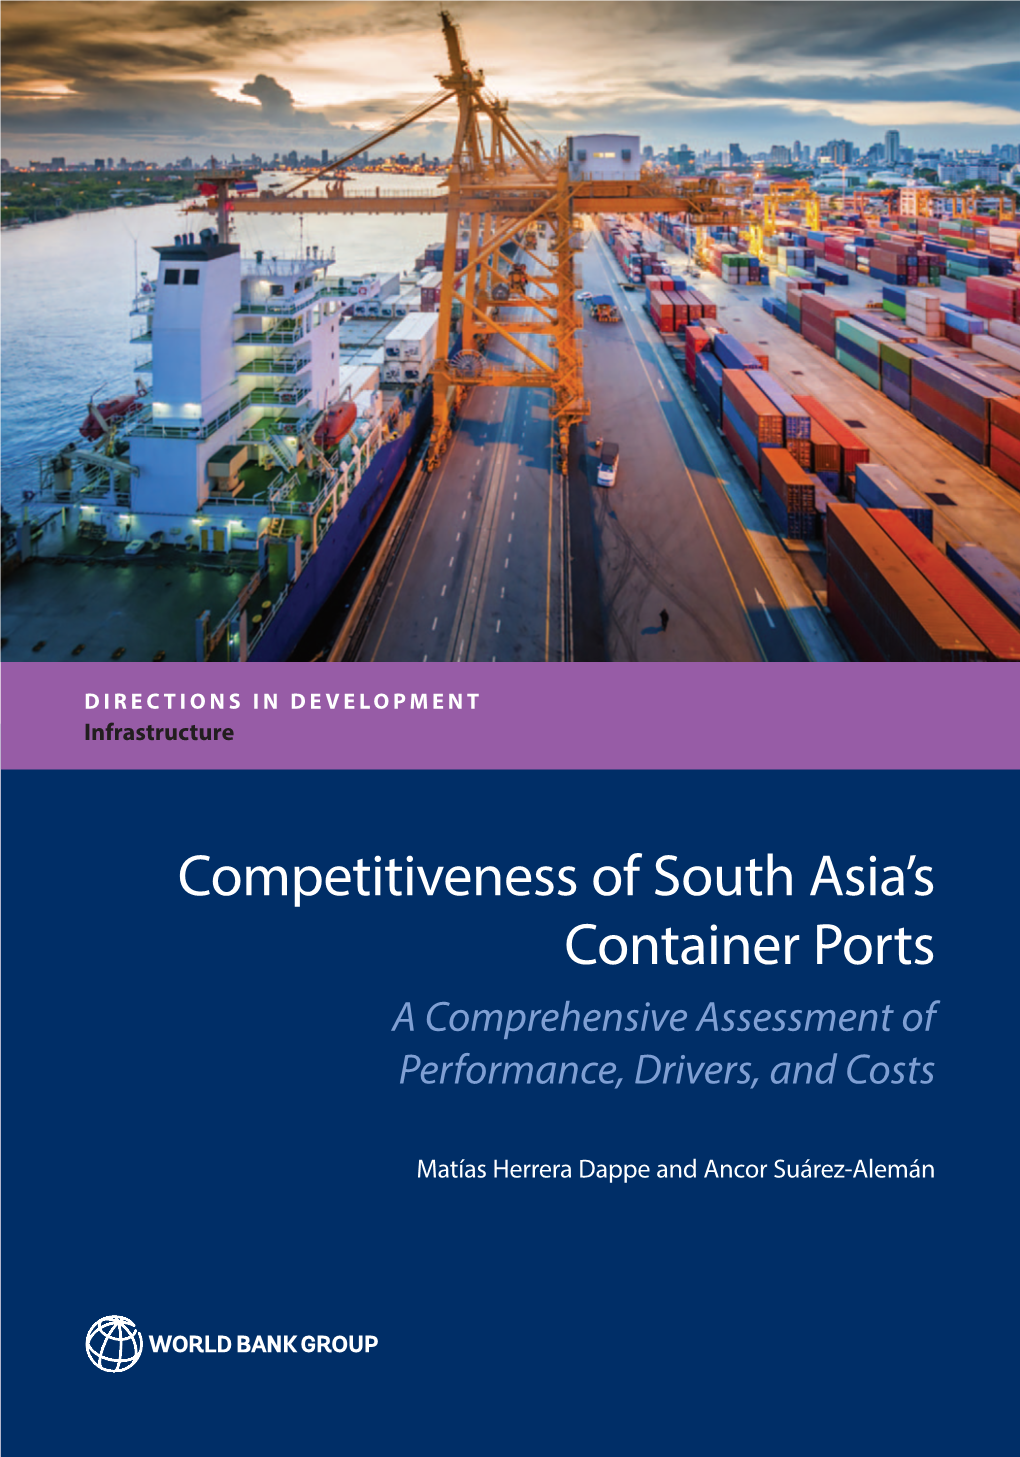 Competitiveness of South Asia's Container Ports